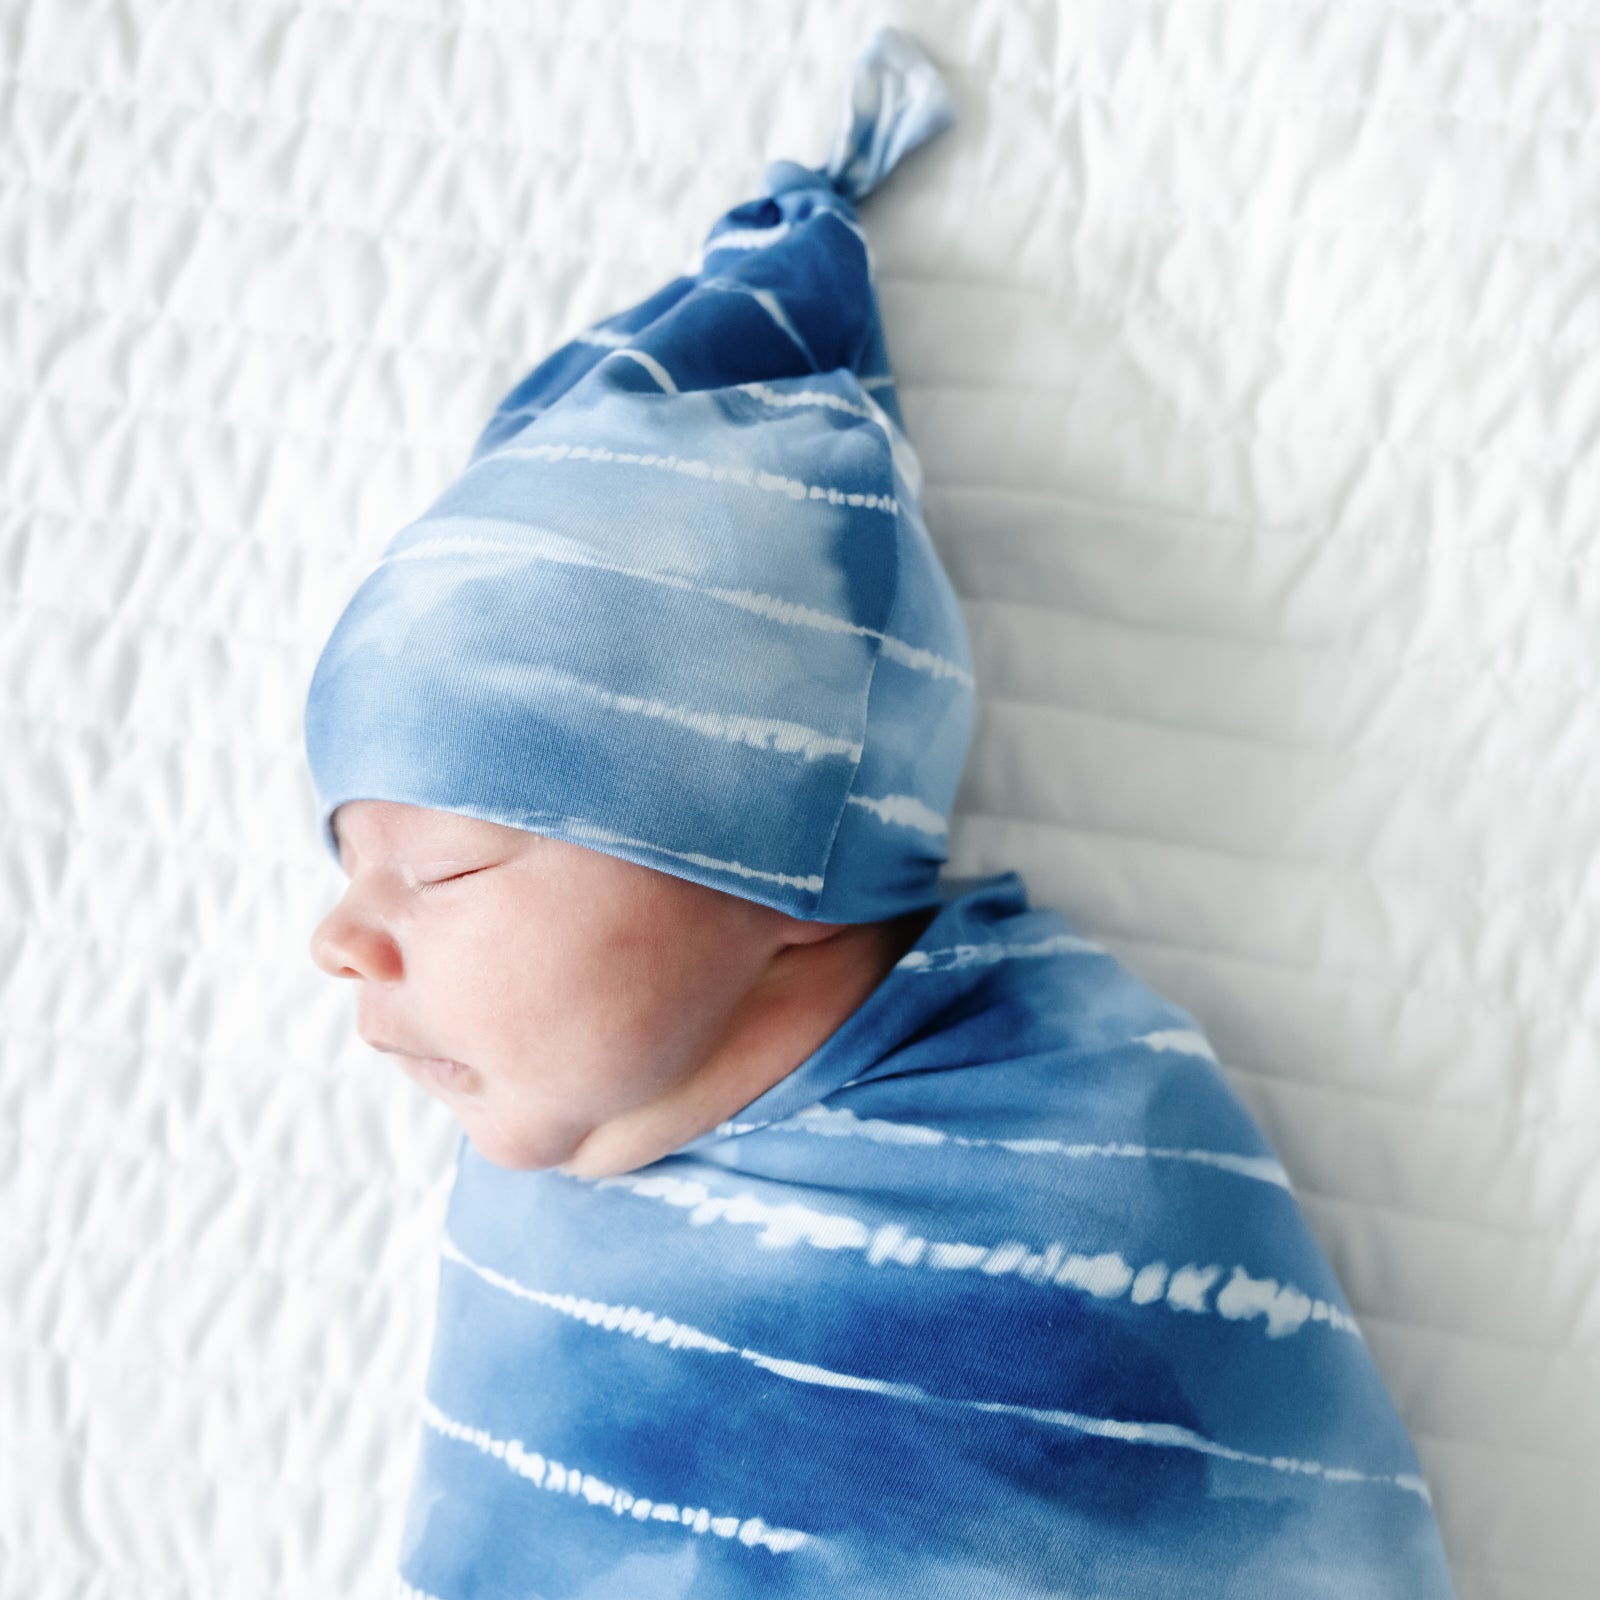 Close up image of an infant swaddled in a Blue Tie Dye Dreams swaddle & hat set